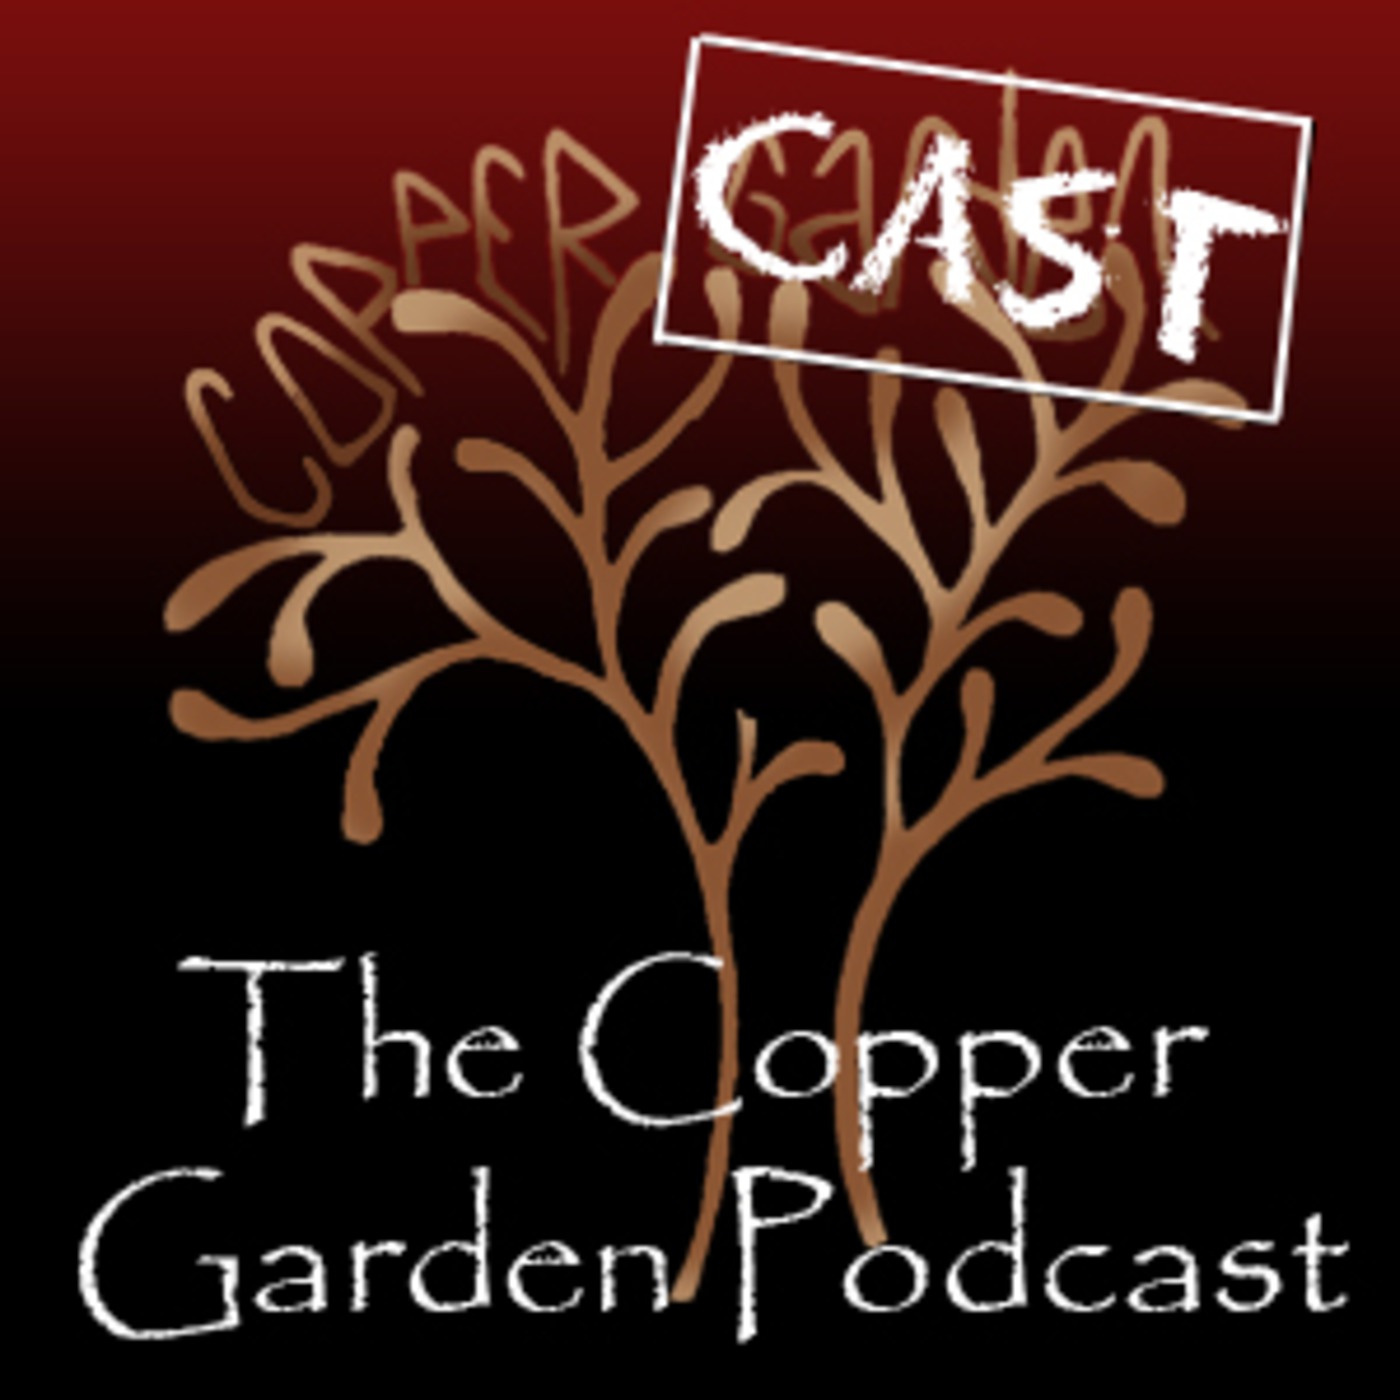 CopperCast